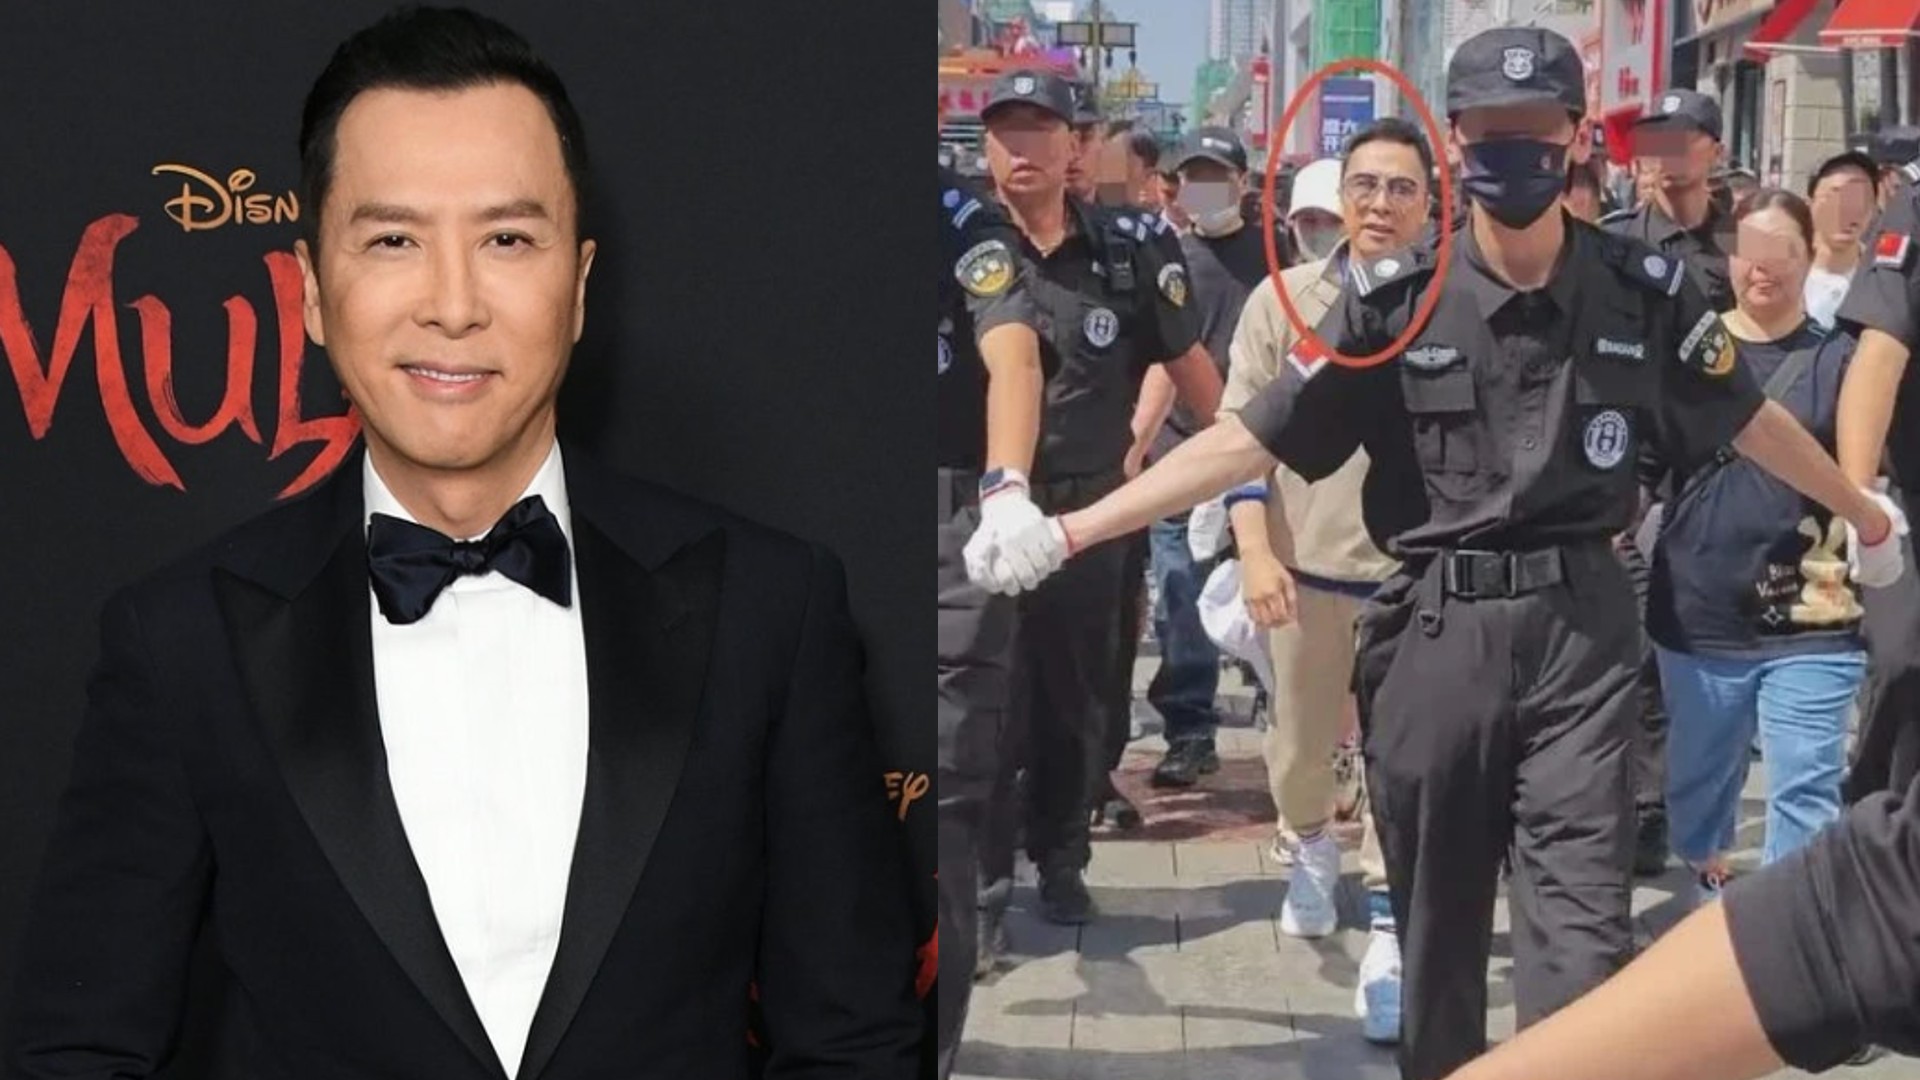 https://onecms-res.cloudinary.com/image/upload/v1693908114/mediacorp/8days/image/2023/09/05/donnie_yen_security_main.jpg